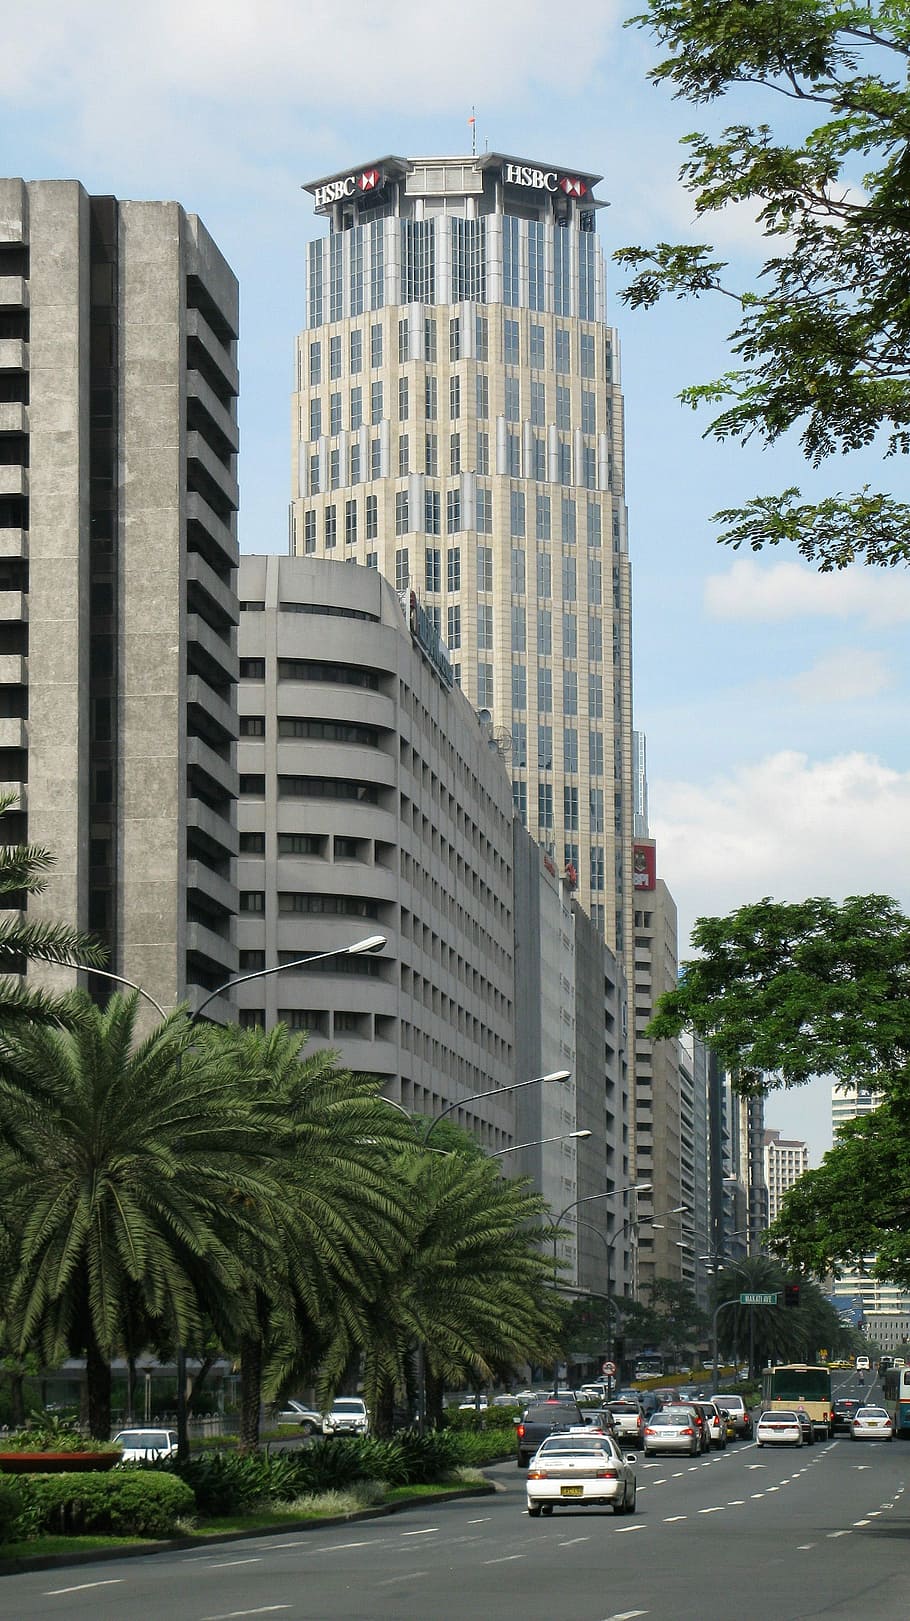 Skyline and roadview in Manila, Philippines, photos, philipinnes